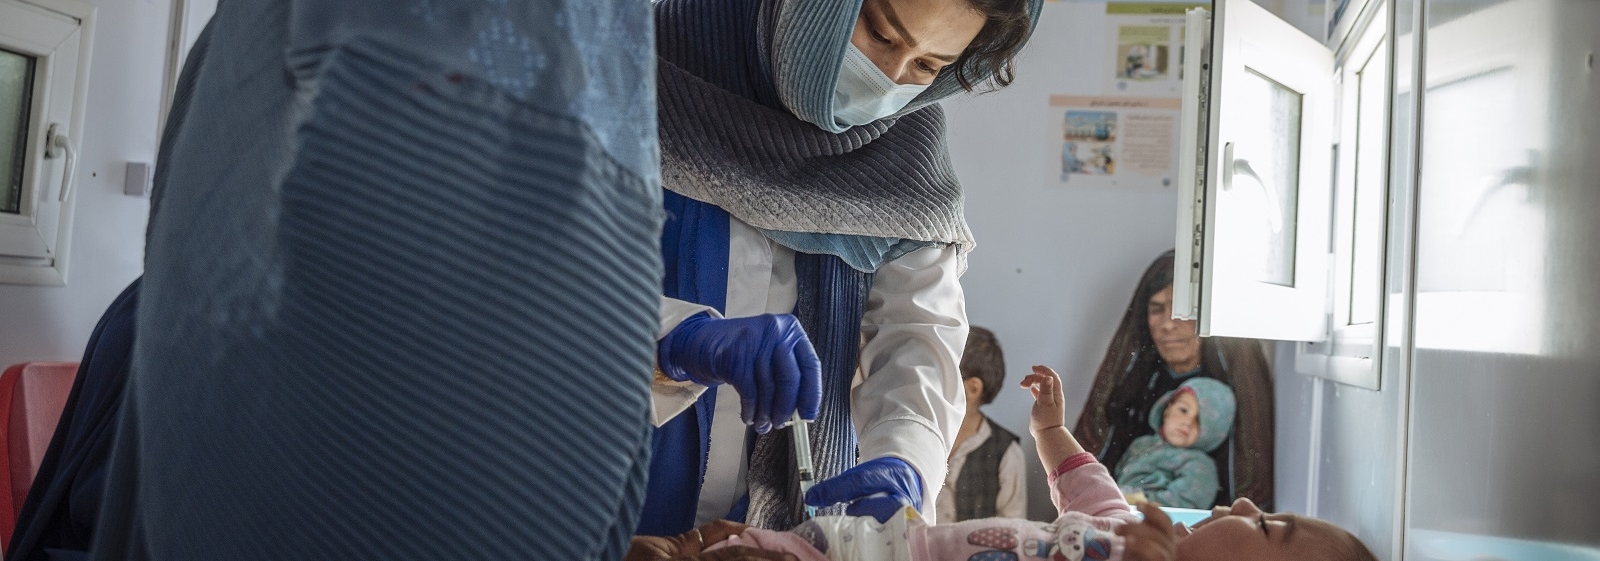 IOM Afghanistan’s Mobile Health Clinic in Shahrak Sabz IDP settlement (Herat) offers health services such as vaccinations, reproductive, maternal and child health, and health education. 2021 © IOM/Muse Mohammed